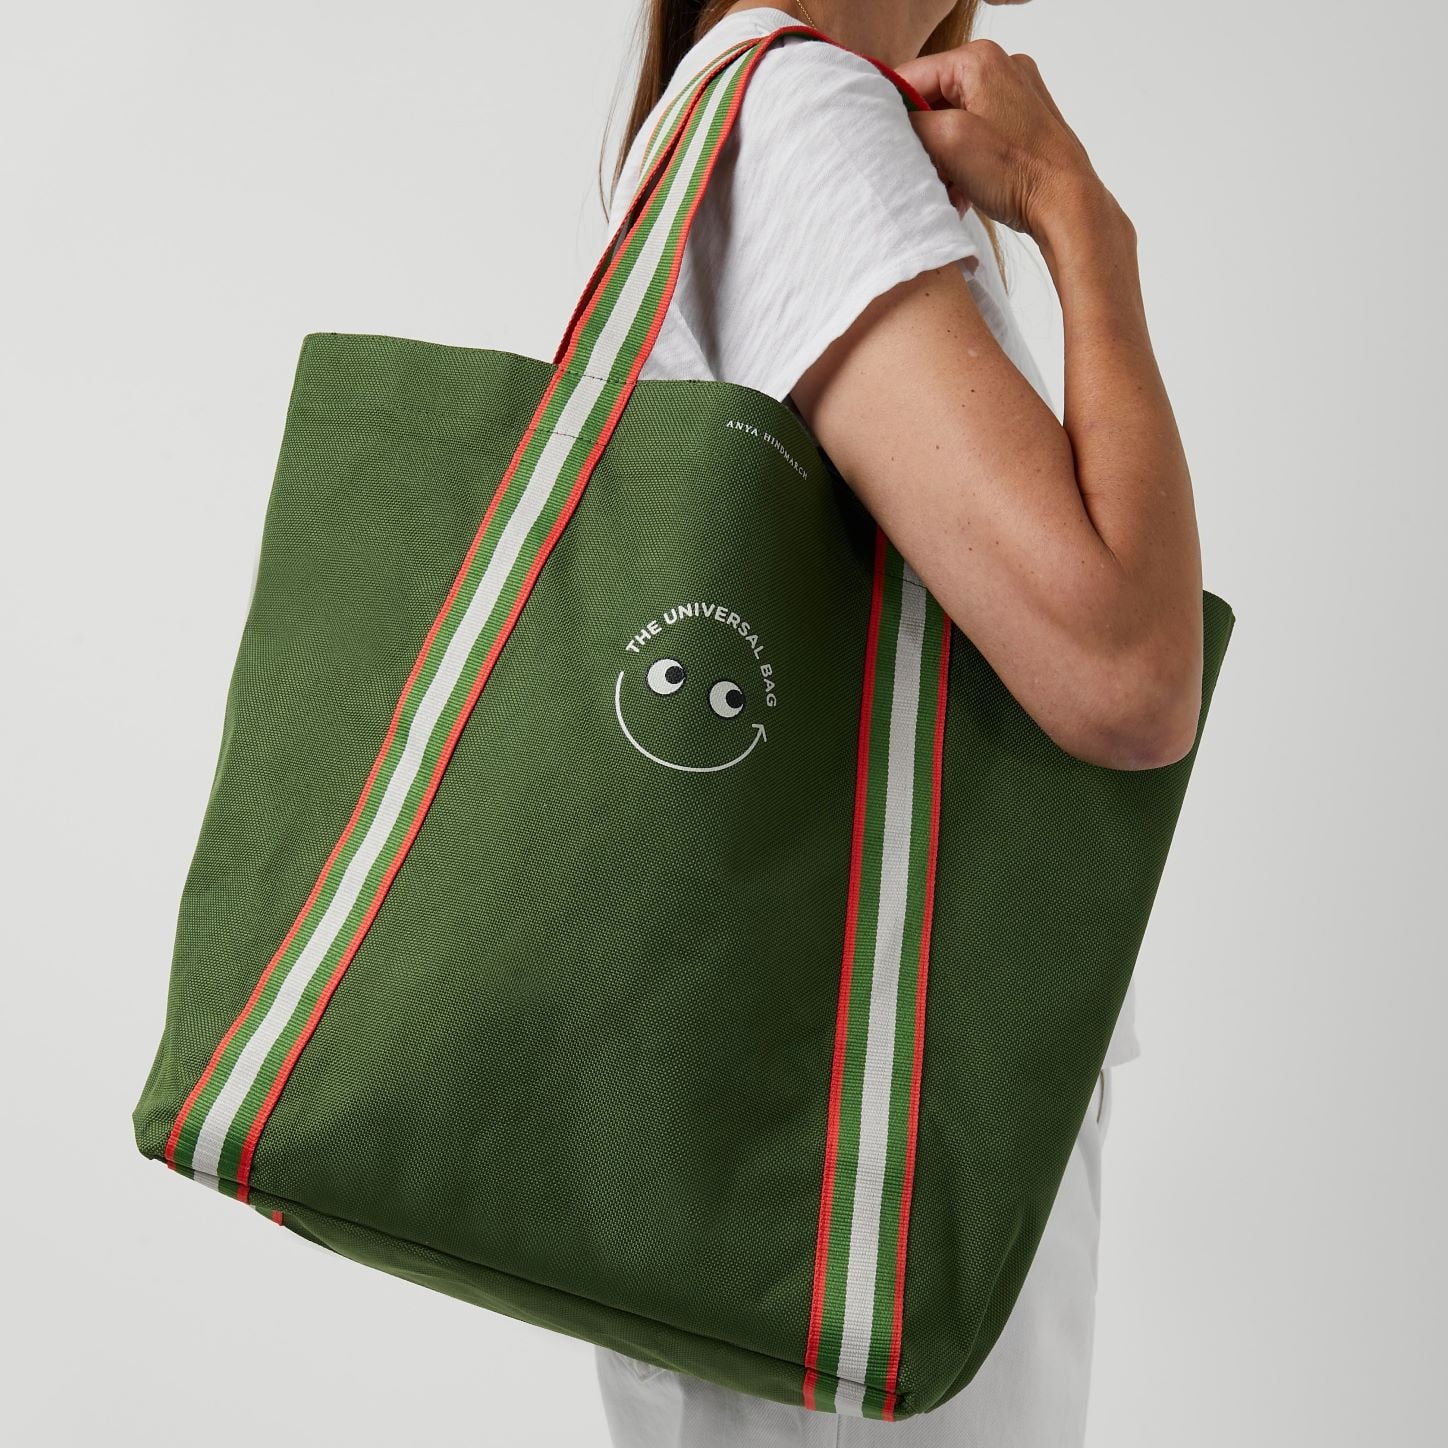 Anya Hindmarch Working from Home Tote Bag